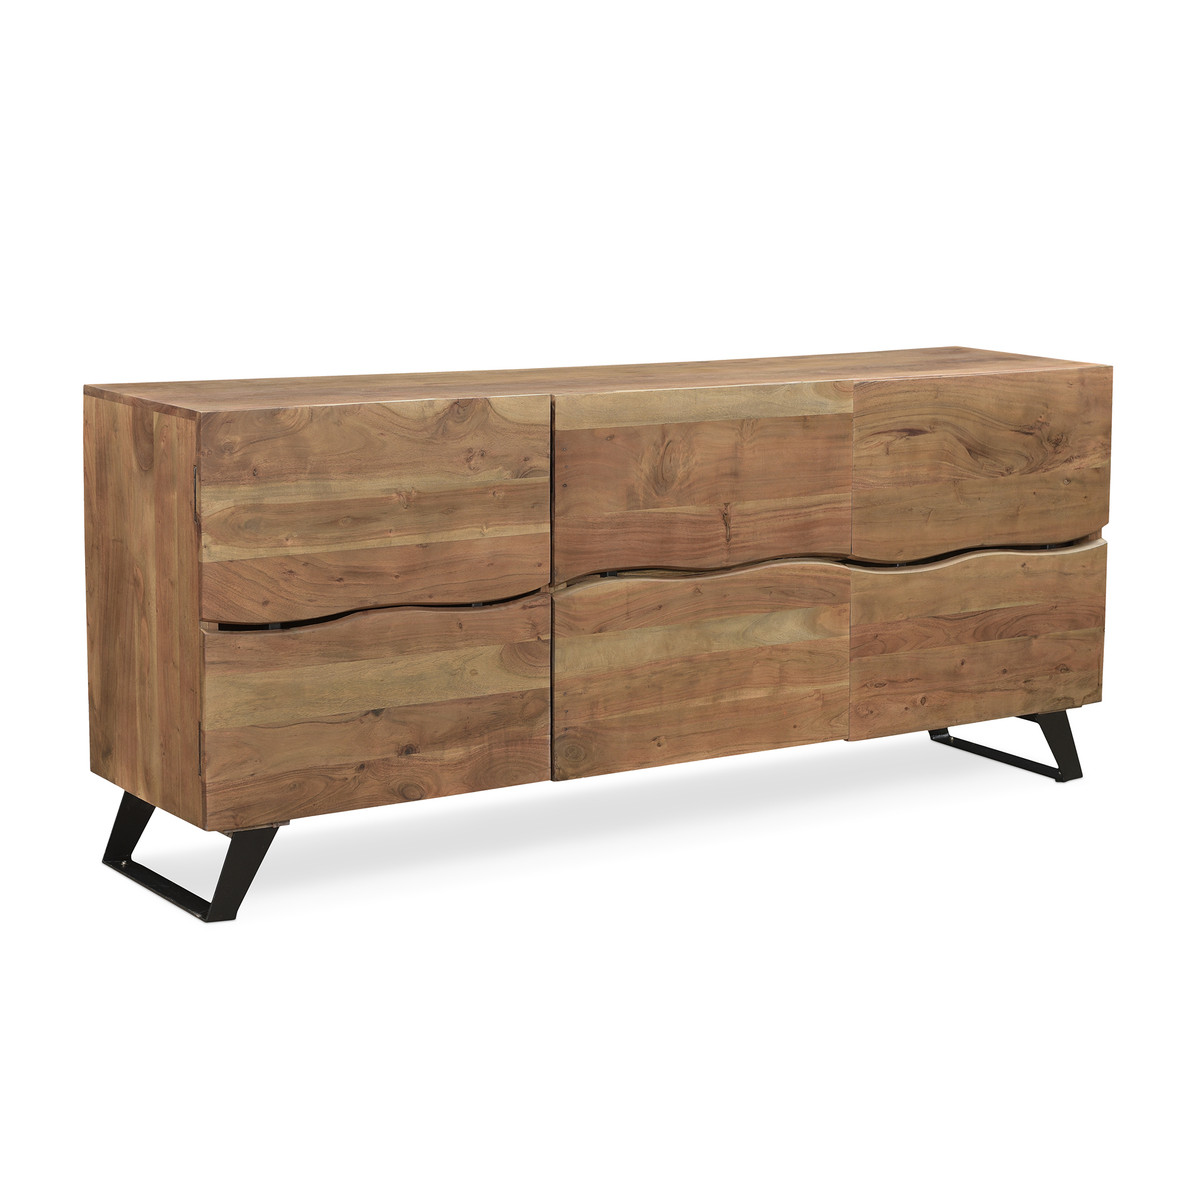 Timbergirl Light Acacia Live Edge Sideboard with Black Legs